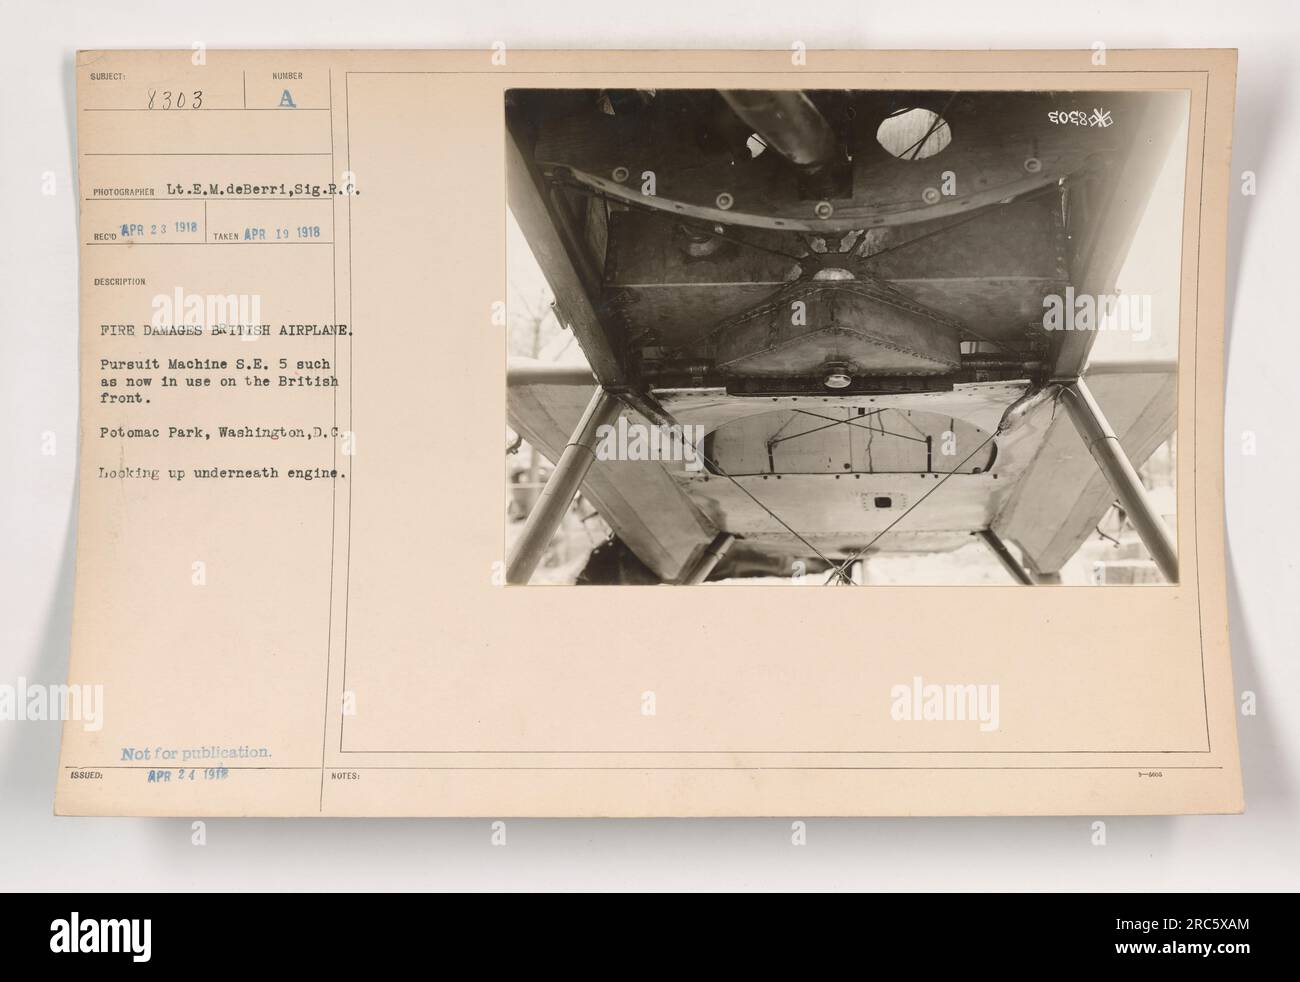 Photograph depicting a British pursuit machine S.E. 5, damaged by fire on April 19, 1918. Lt. E.M. deBerri, Sig. R.C. took the photo on April 23, 1918, in Potomac Park, Washington, D.C. The image shows a view underneath the engine and was not intended for publication. Stock Photo